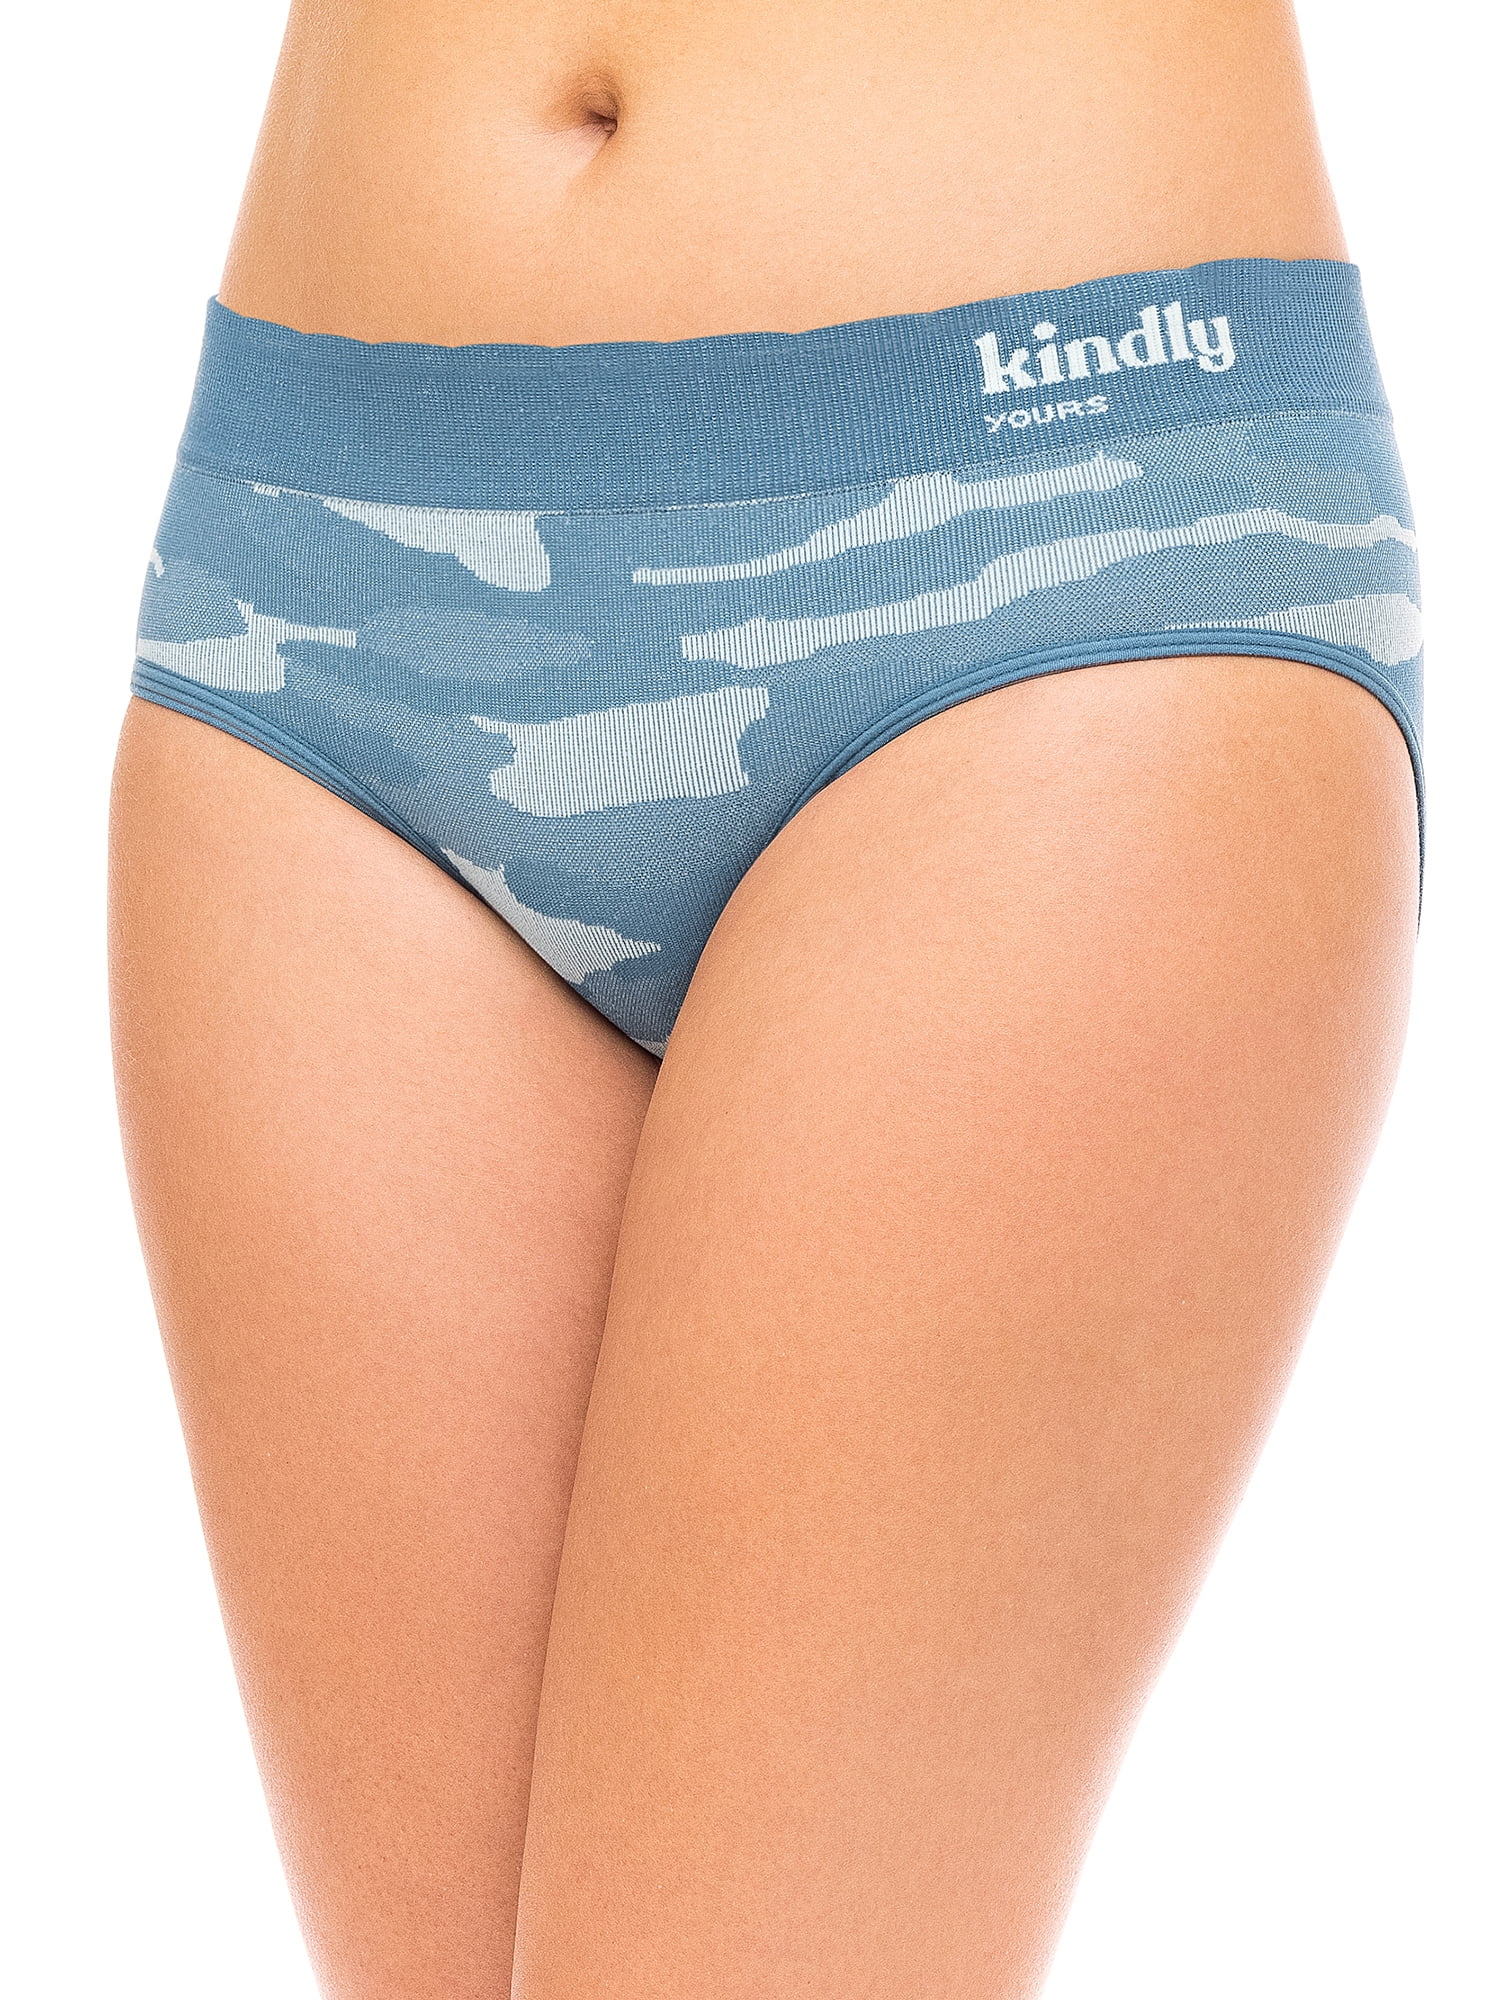 Kindly Yours Women's Seamless Hipster Underwear 3-Pack, Sizes XS to XXXL 